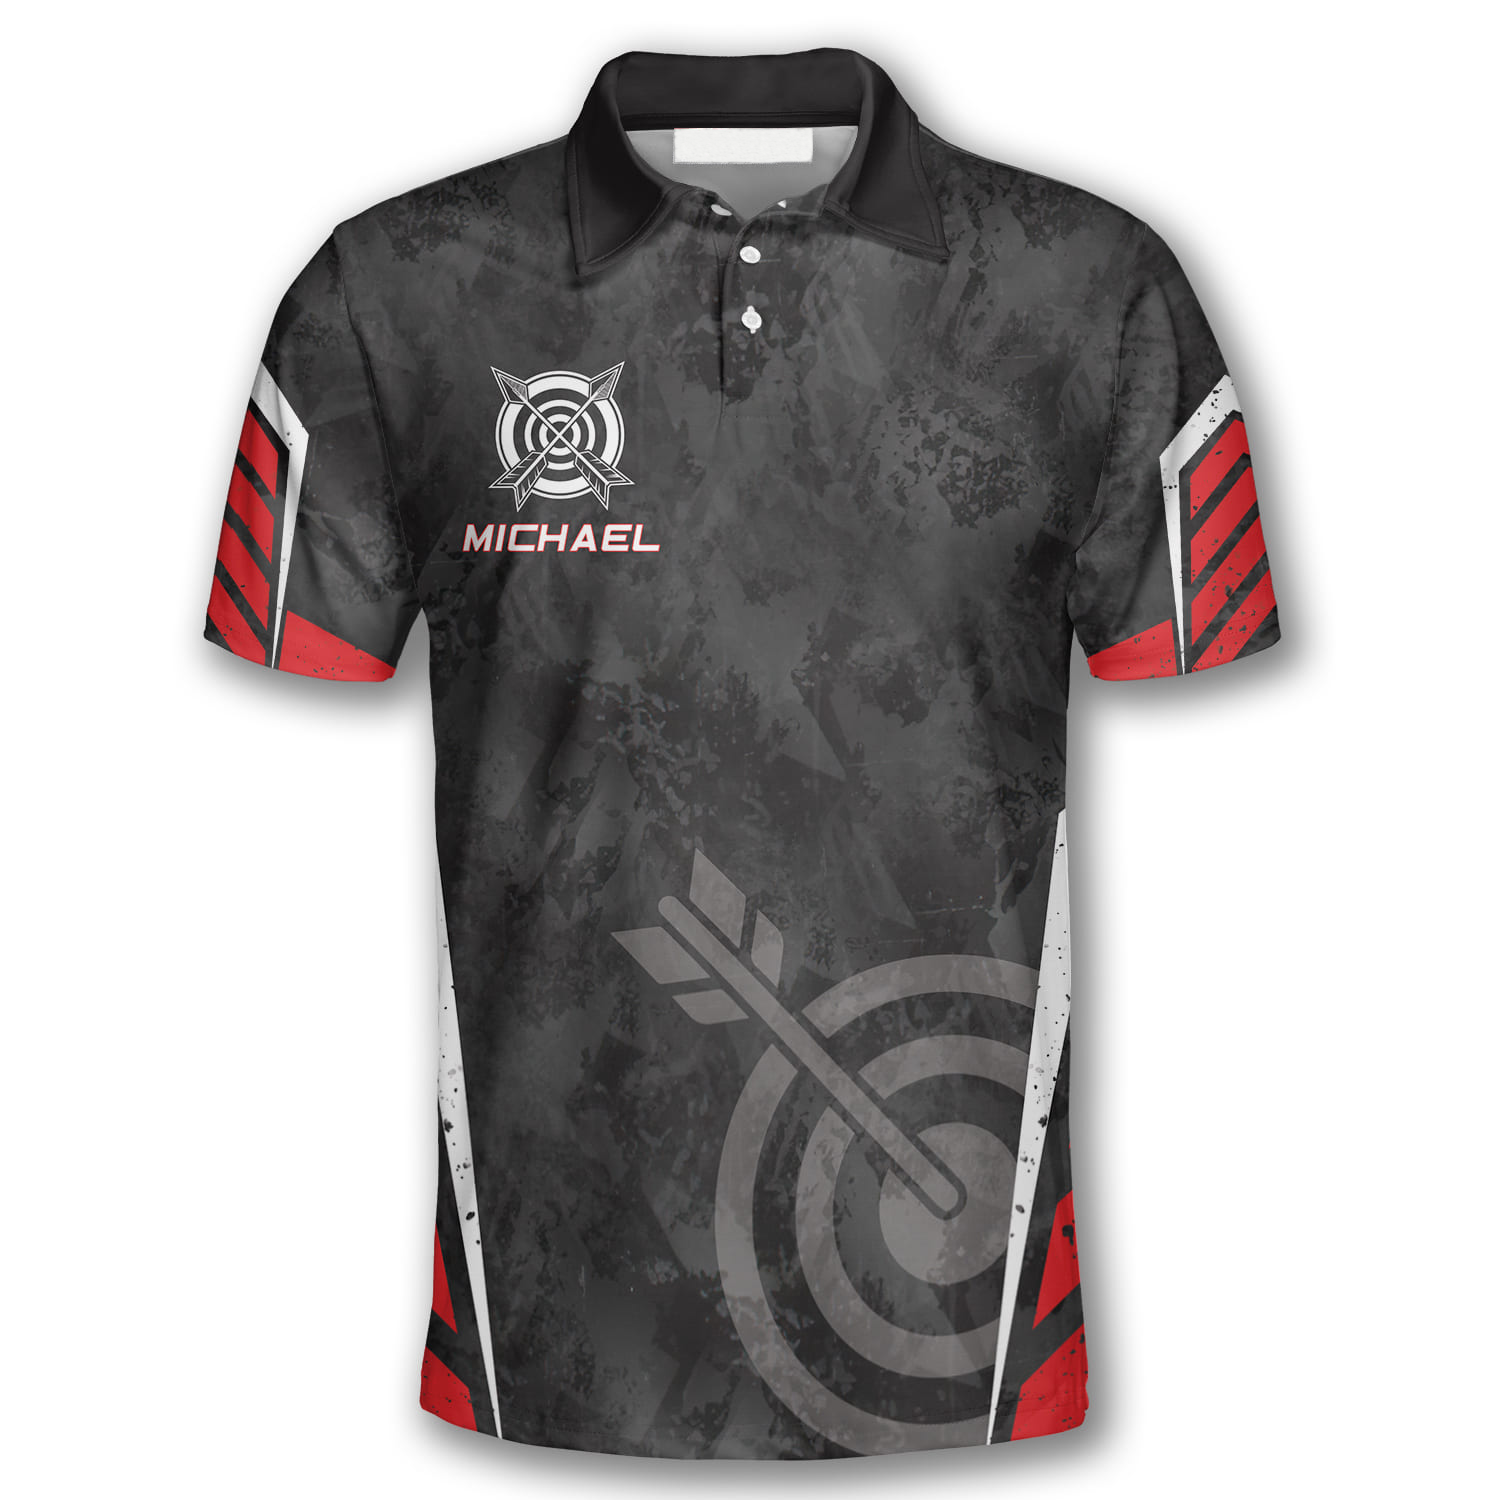 Archery Target Red Black Grunge Style Custom Archery Polo Shirts for Men